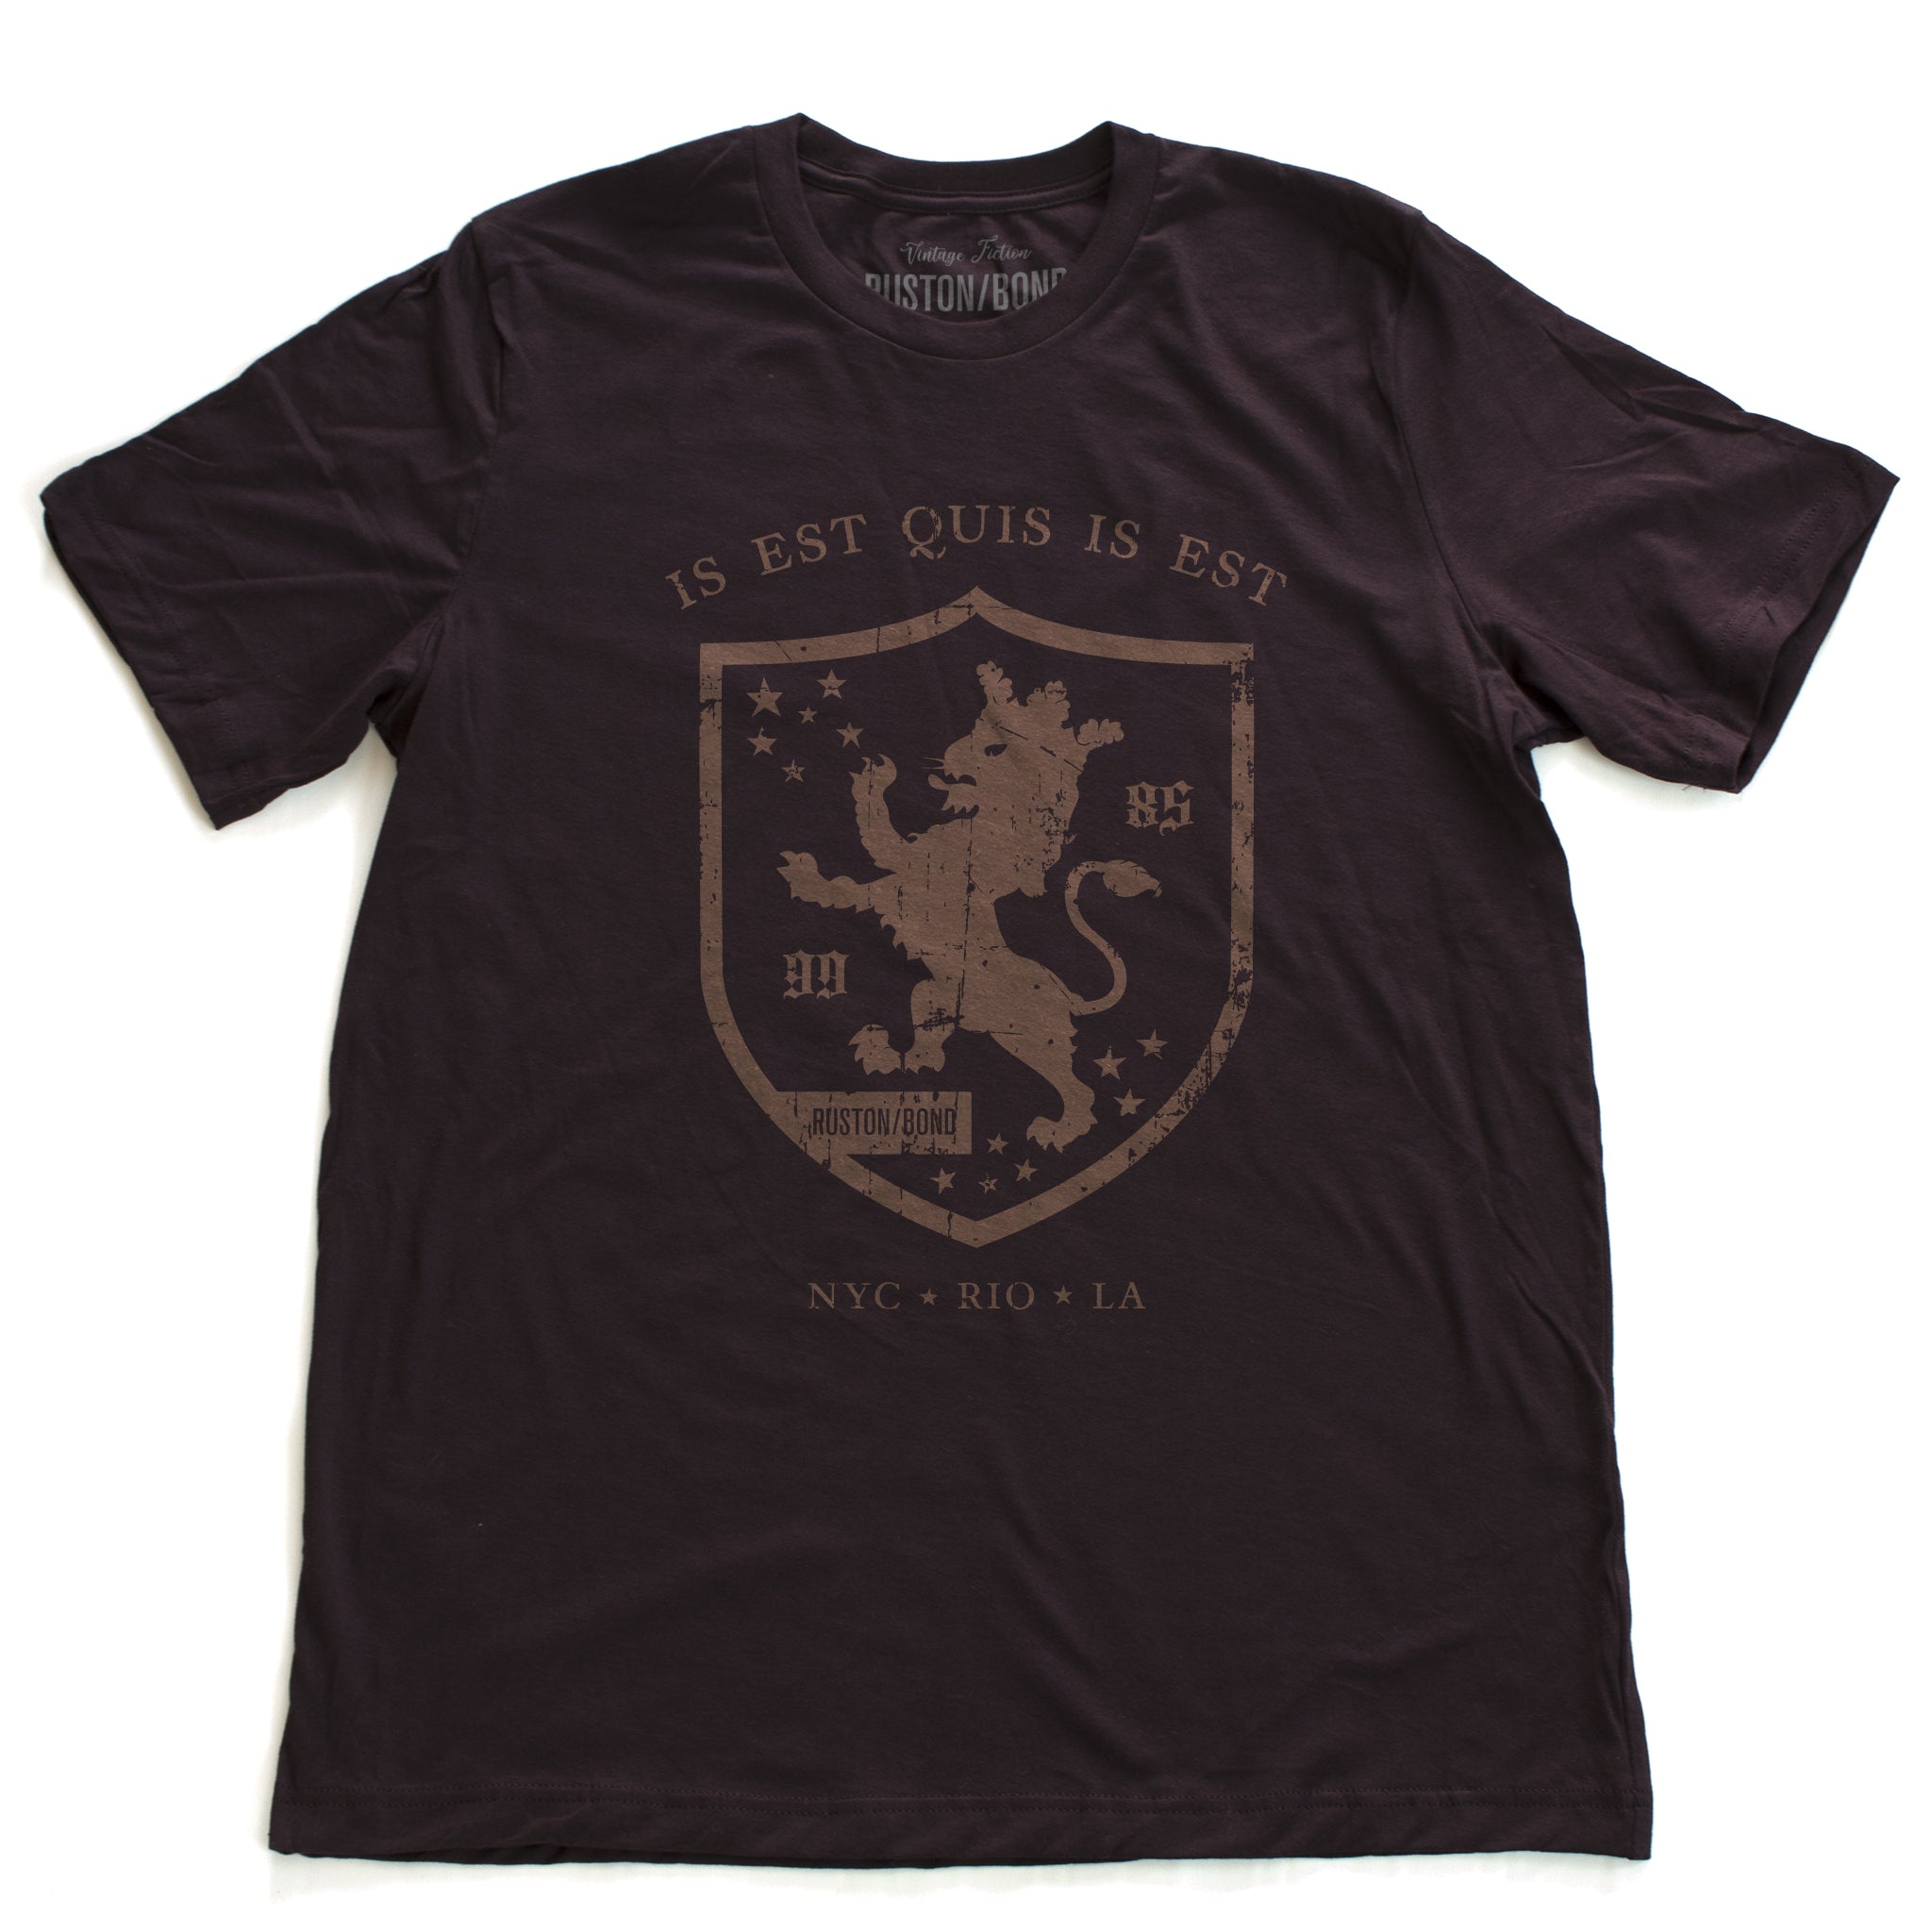 A retro, vintage-inspired fashion t-shirt in Oxblood, with an medieval graphic of a lion within a shield,surrounded by the sarcastic text in Latin “it is what it is,” and New York, Rio, Los Angeles at the bottom. By fashion brand Ruston/Bond, from wolfsaint.net